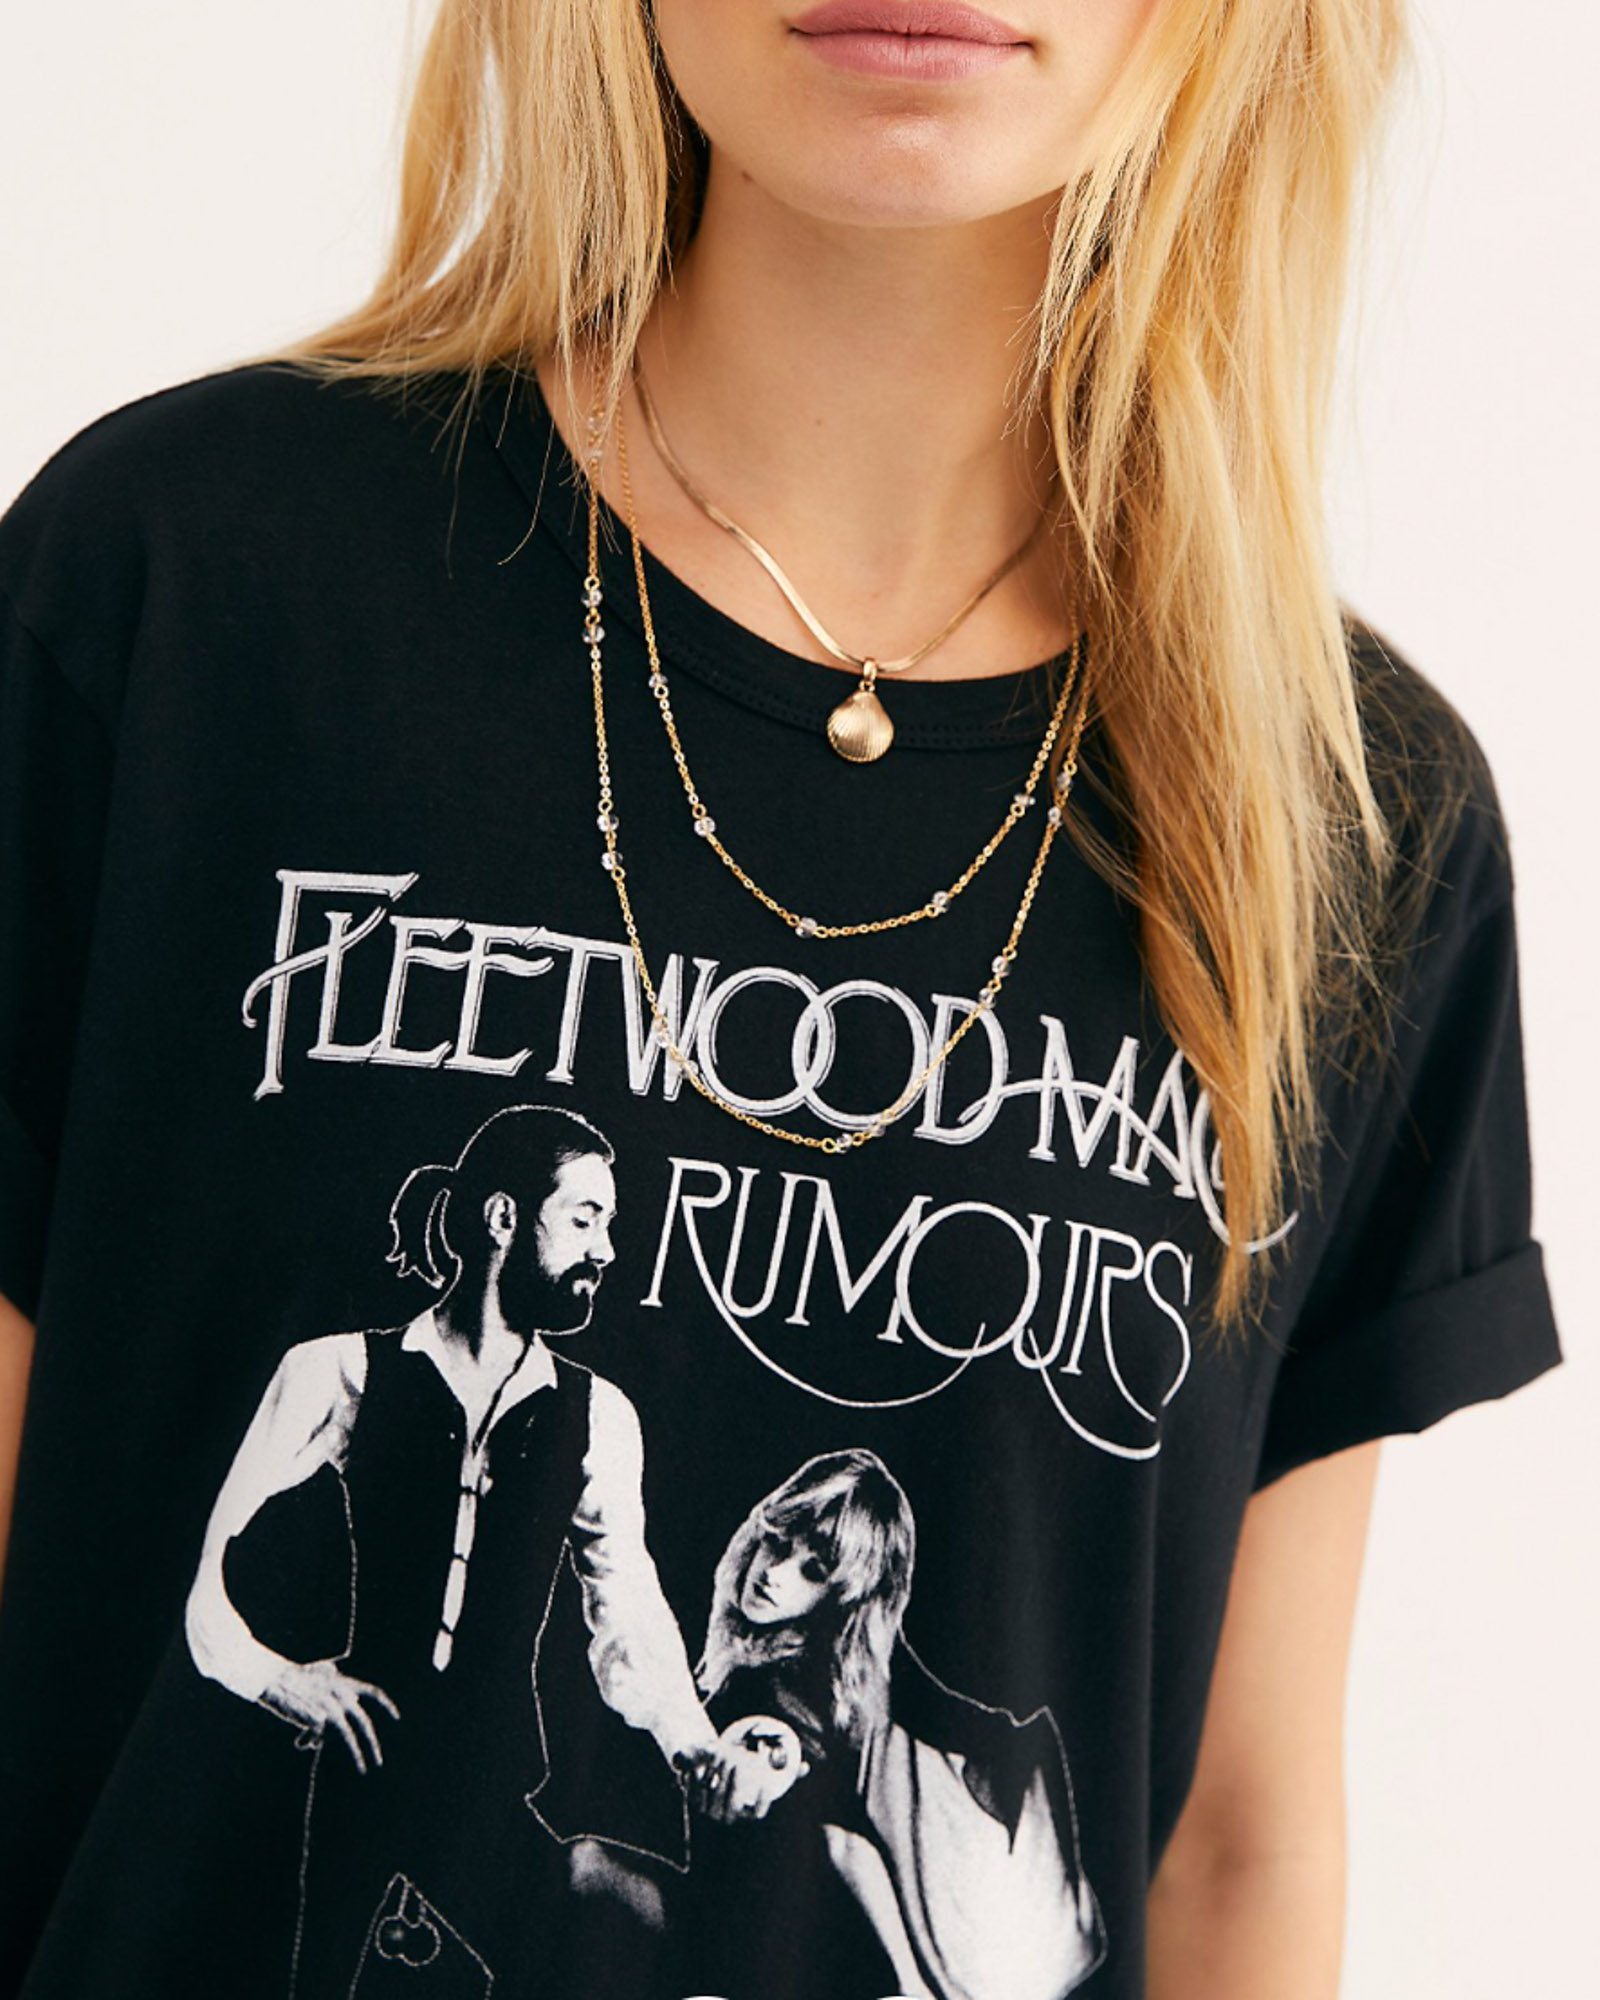 The Fleetwood Mac dancing tee in black and white.